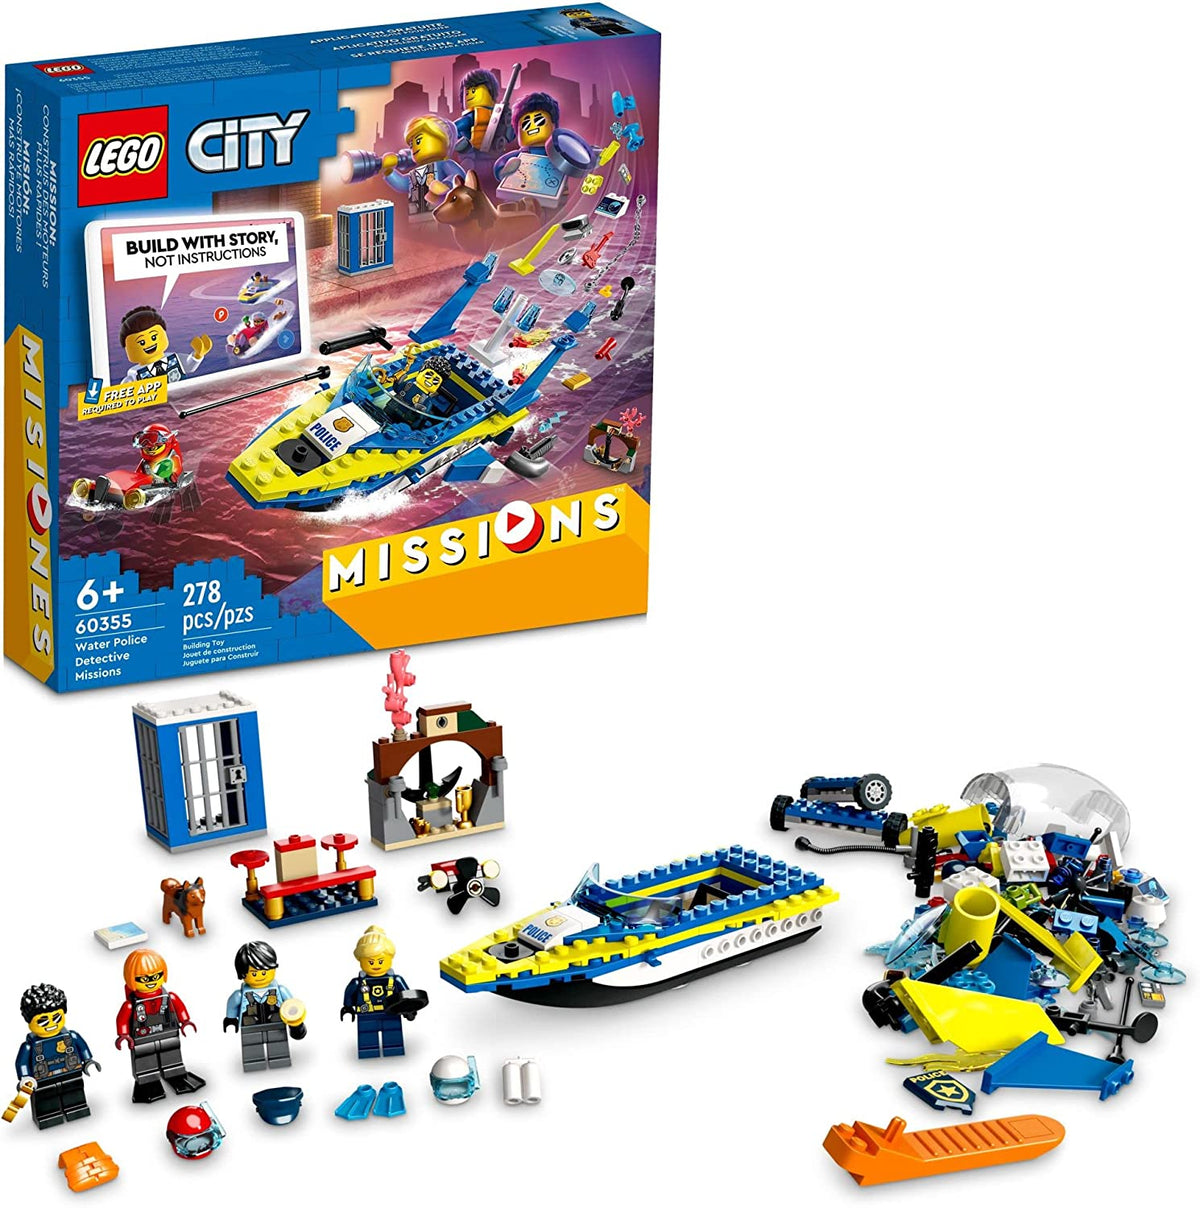 CITY 60355: Water Police Detective Missions